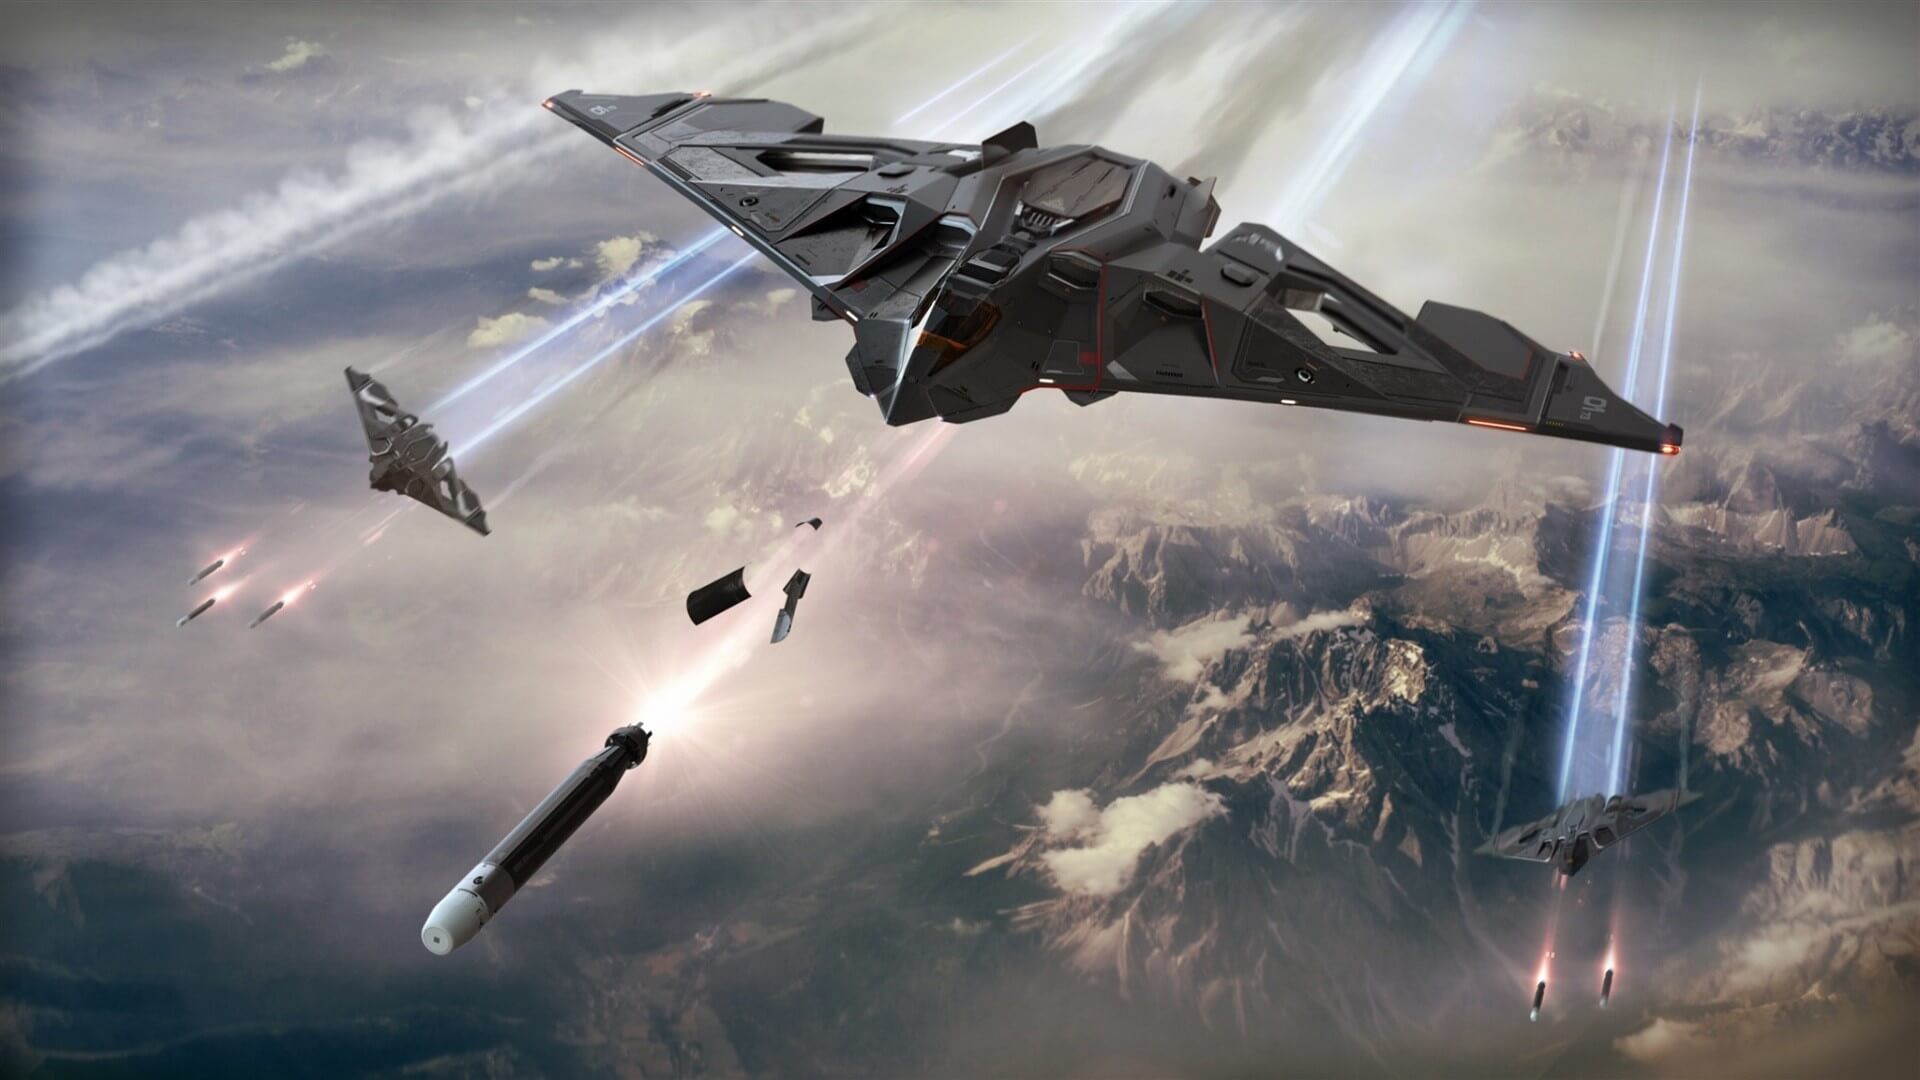 Former CIG employee comments on Star Citizen's progress